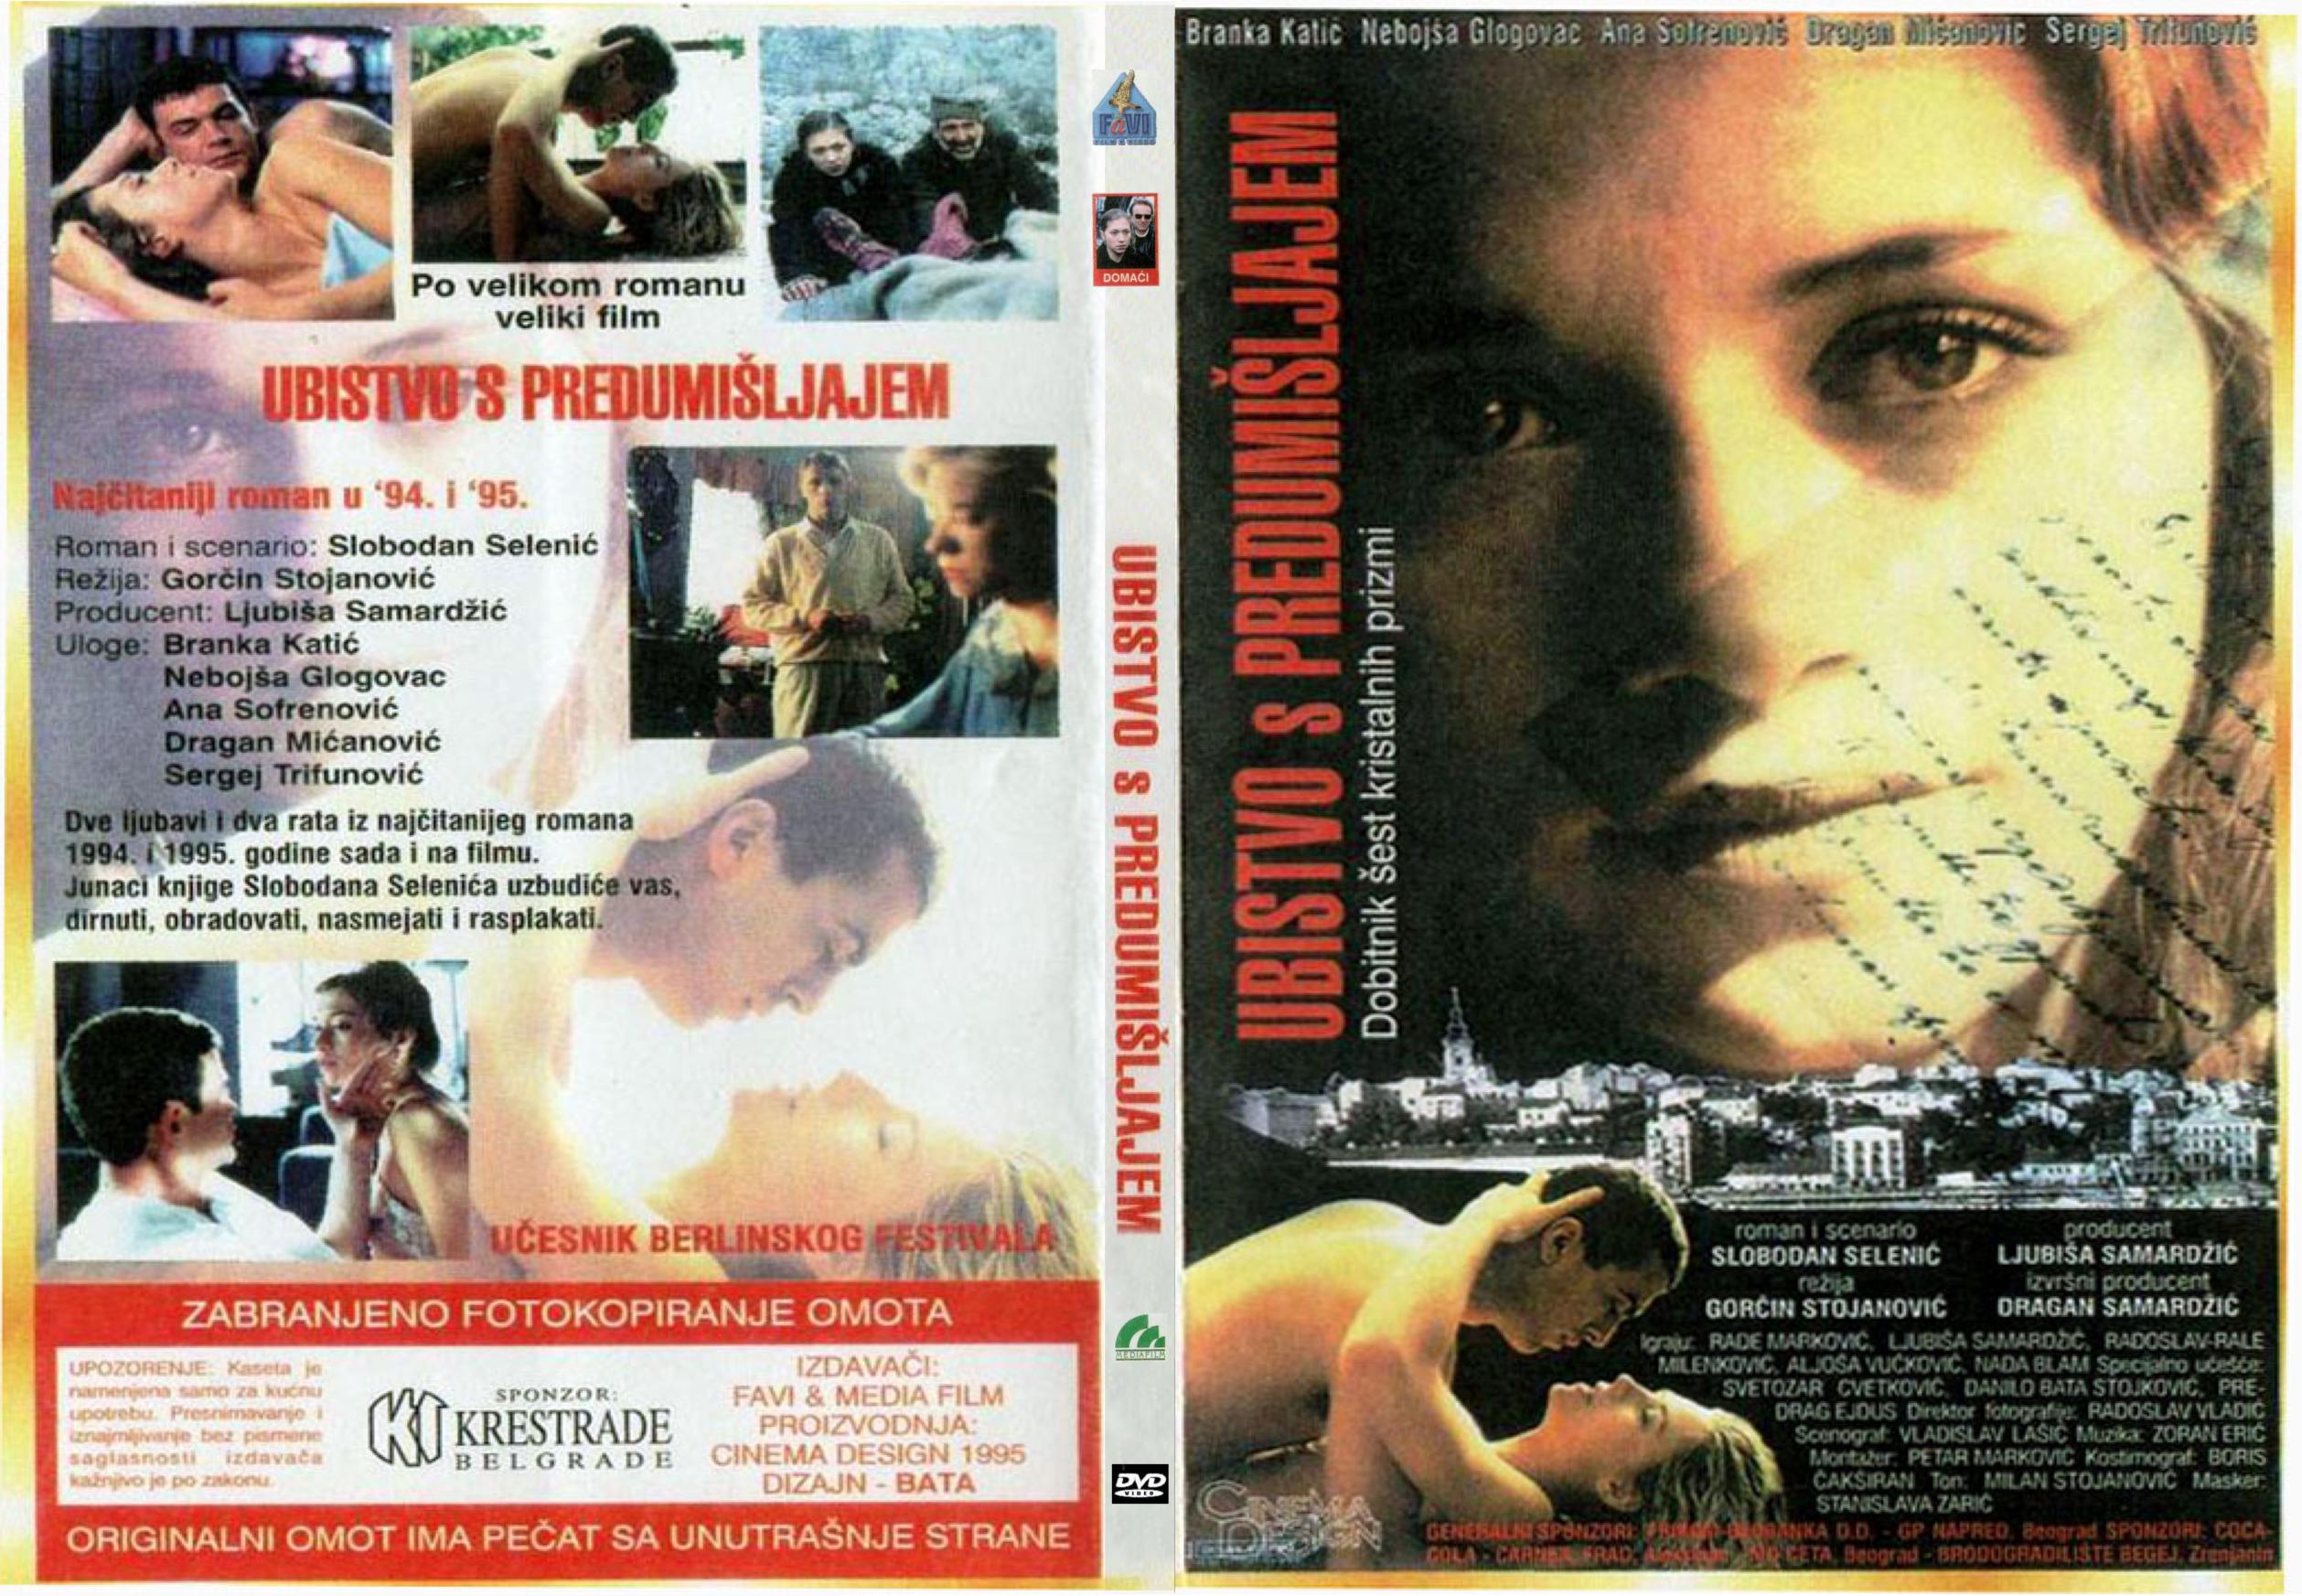 Click to view full size image -  DVD Cover - U - DVD - UBISTVO S PREDOMISLJAJEM - DVD - UBISTVO S PREDOMISLJAJEM.jpg